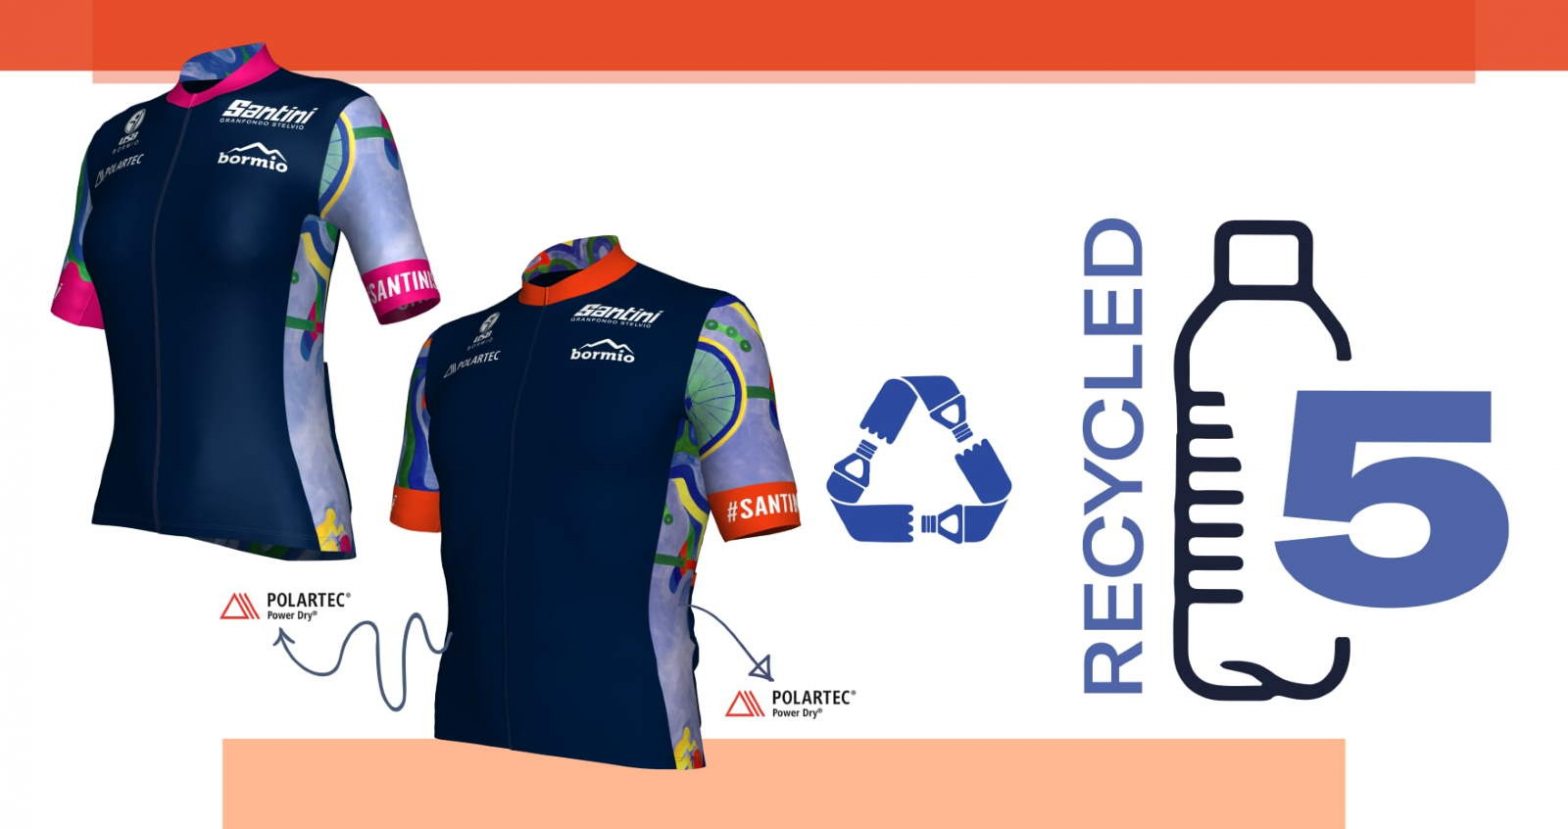 2021 Granfondo Stelvio Santini Eco-Friendly Official Jersey and recycled bottles